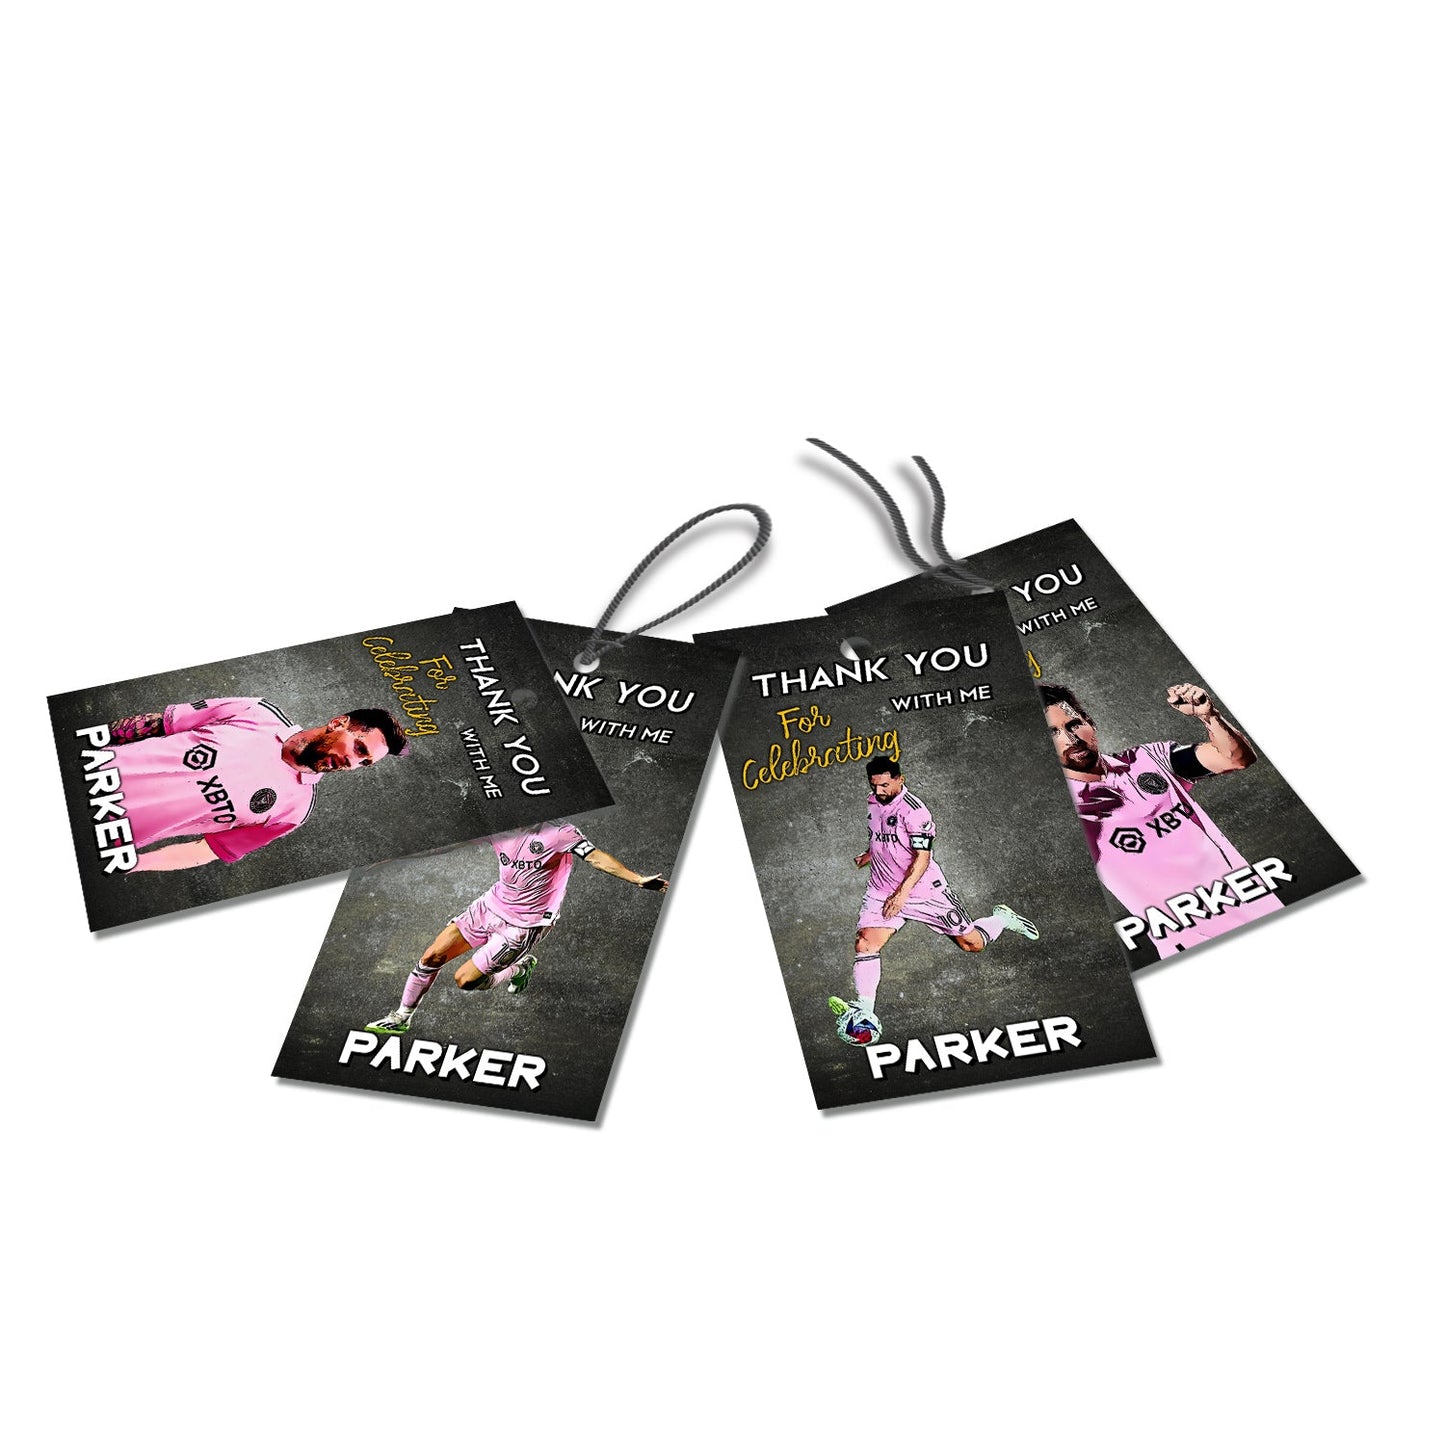 Favor tags or thank you tags featuring Lionel Messi